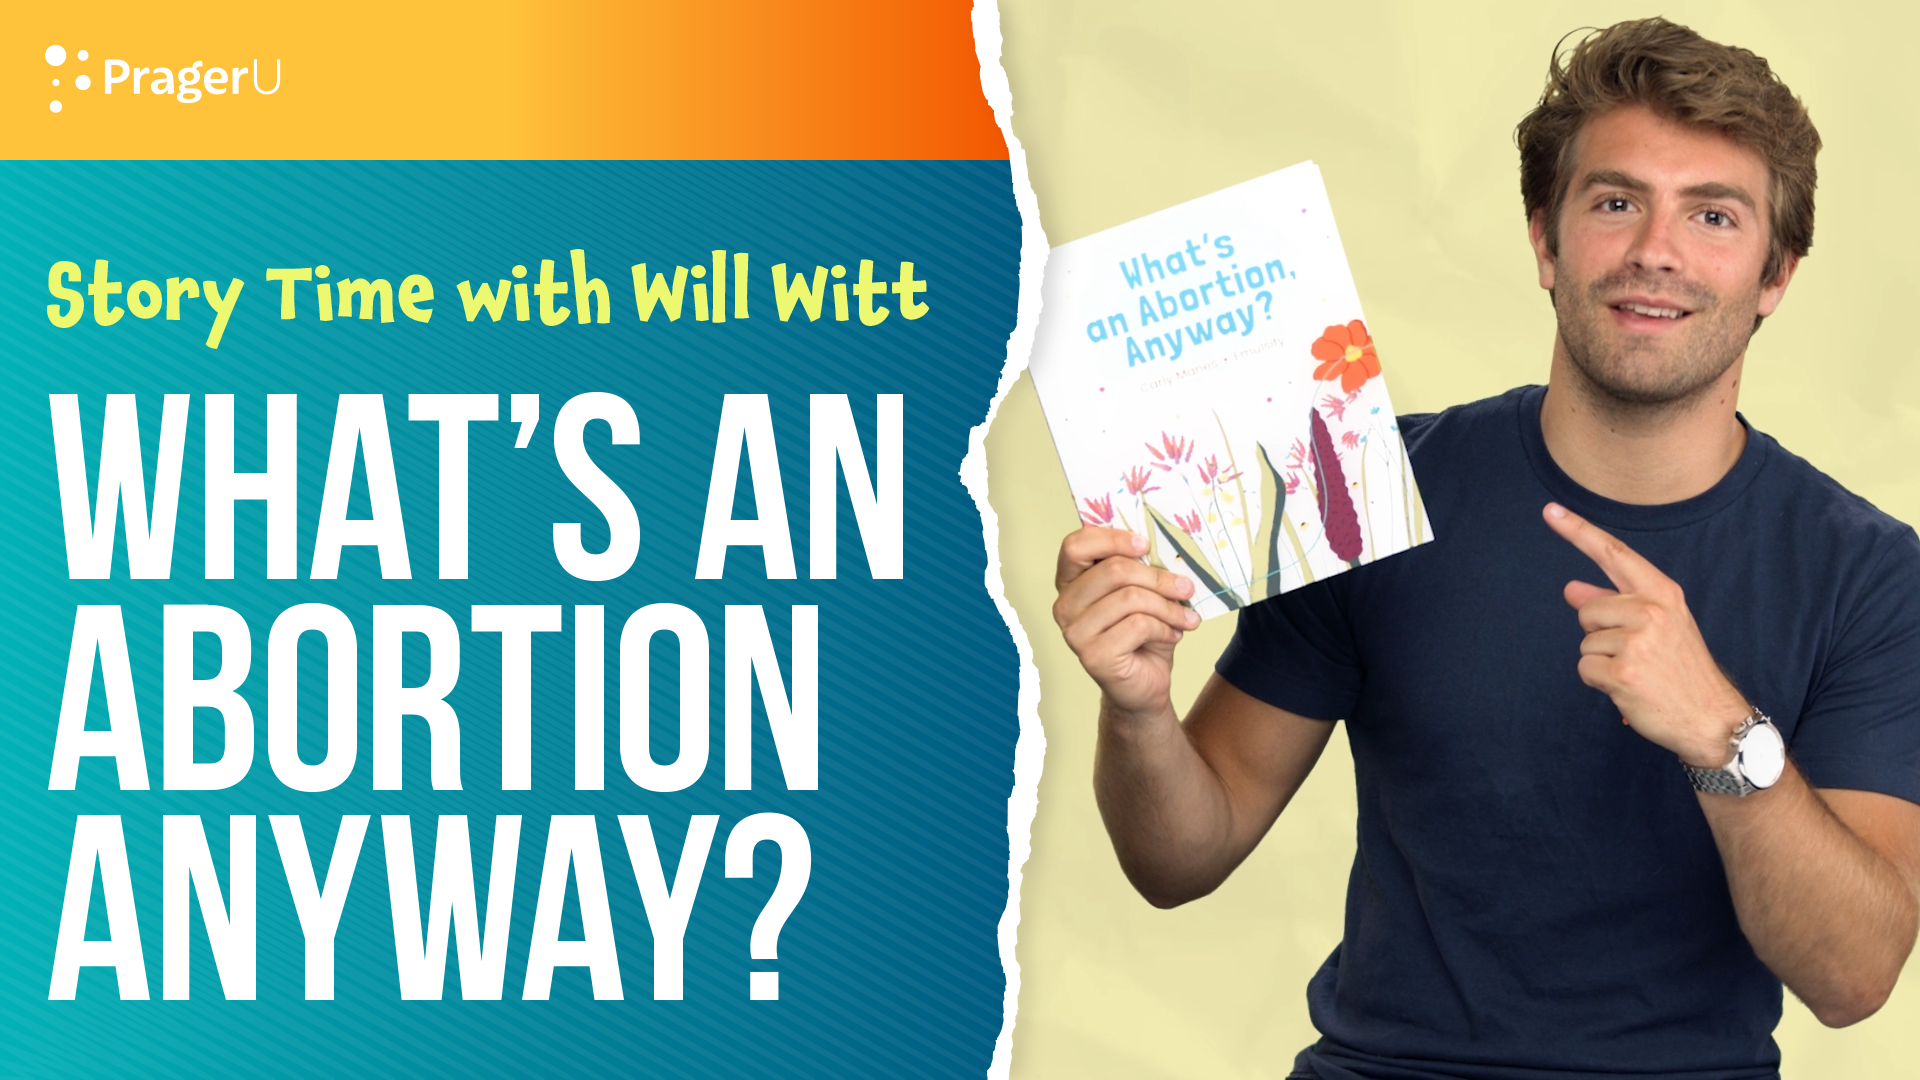 Story Time with Will Witt: What's an Abortion, Anyway?